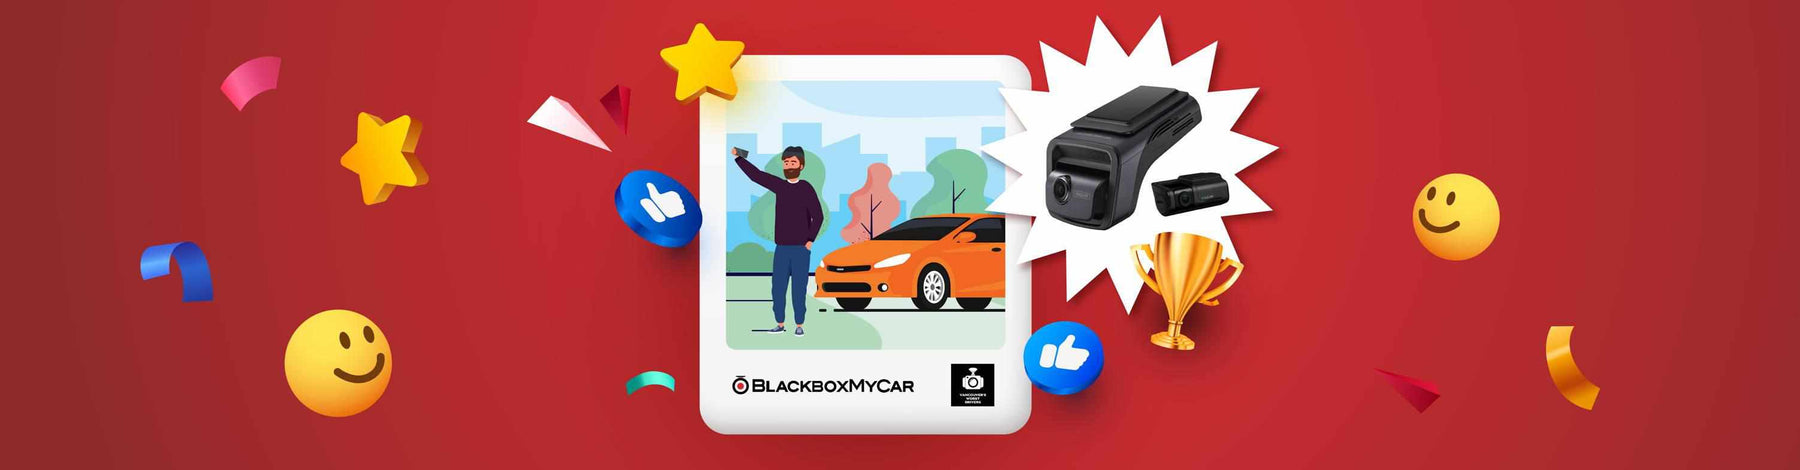 Snap, Share, and Win a Brand New Thinkware U3000 with BBMC’s Photo Contest Giveaway! - - BlackboxMyCar